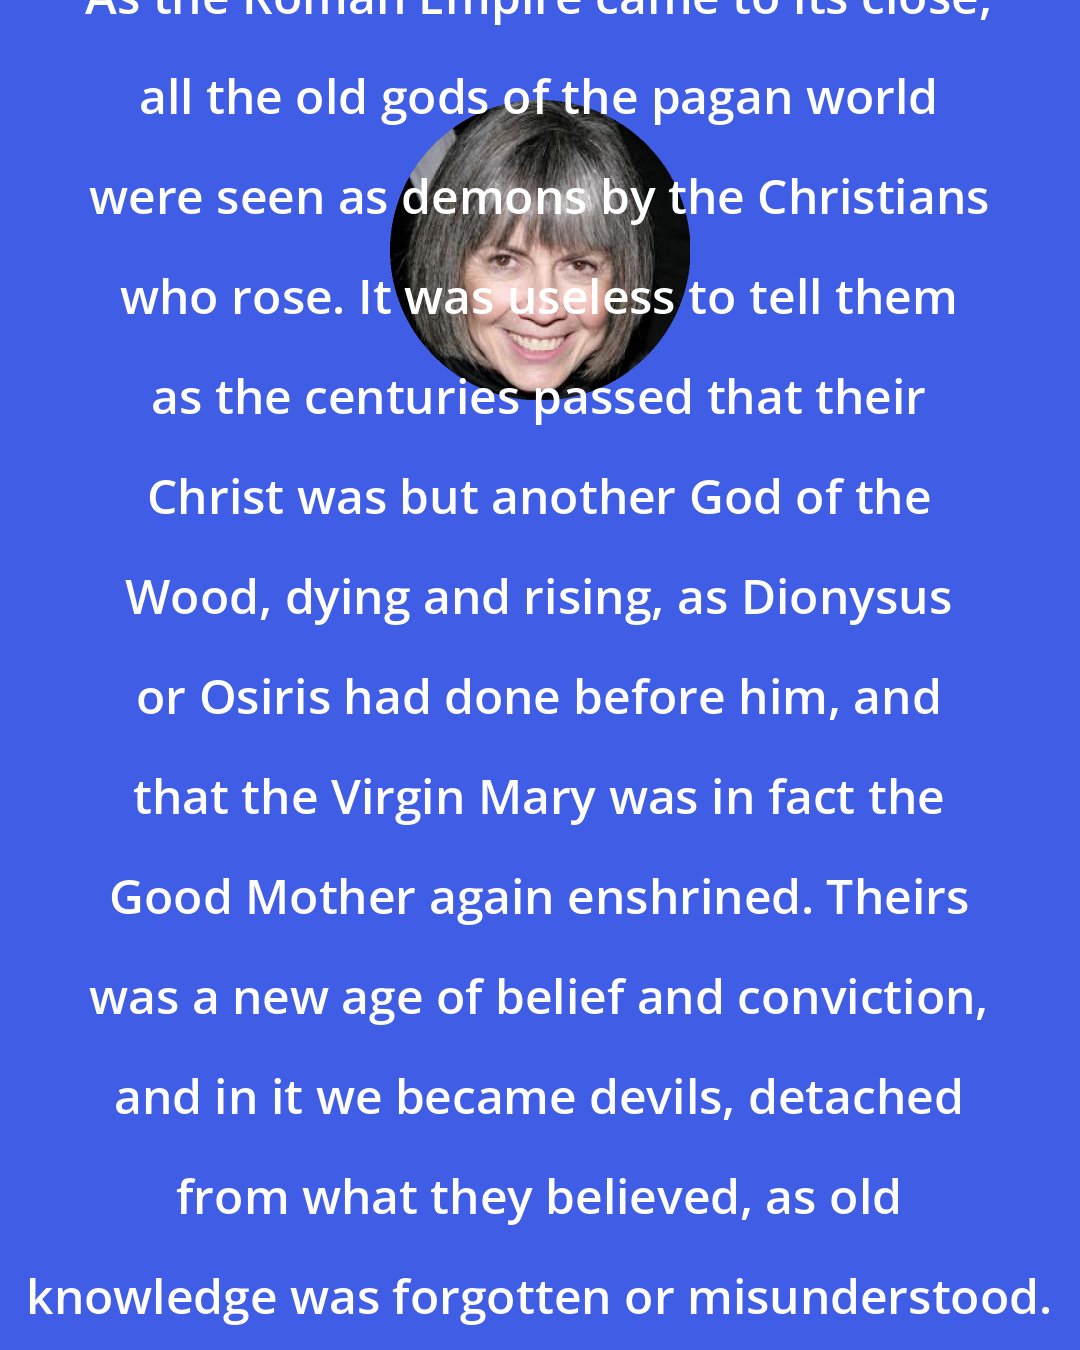 Anne Rice: As the Roman Empire came to its close, all the old gods of the pagan world were seen as demons by the Christians who rose. It was useless to tell them as the centuries passed that their Christ was but another God of the Wood, dying and rising, as Dionysus or Osiris had done before him, and that the Virgin Mary was in fact the Good Mother again enshrined. Theirs was a new age of belief and conviction, and in it we became devils, detached from what they believed, as old knowledge was forgotten or misunderstood.